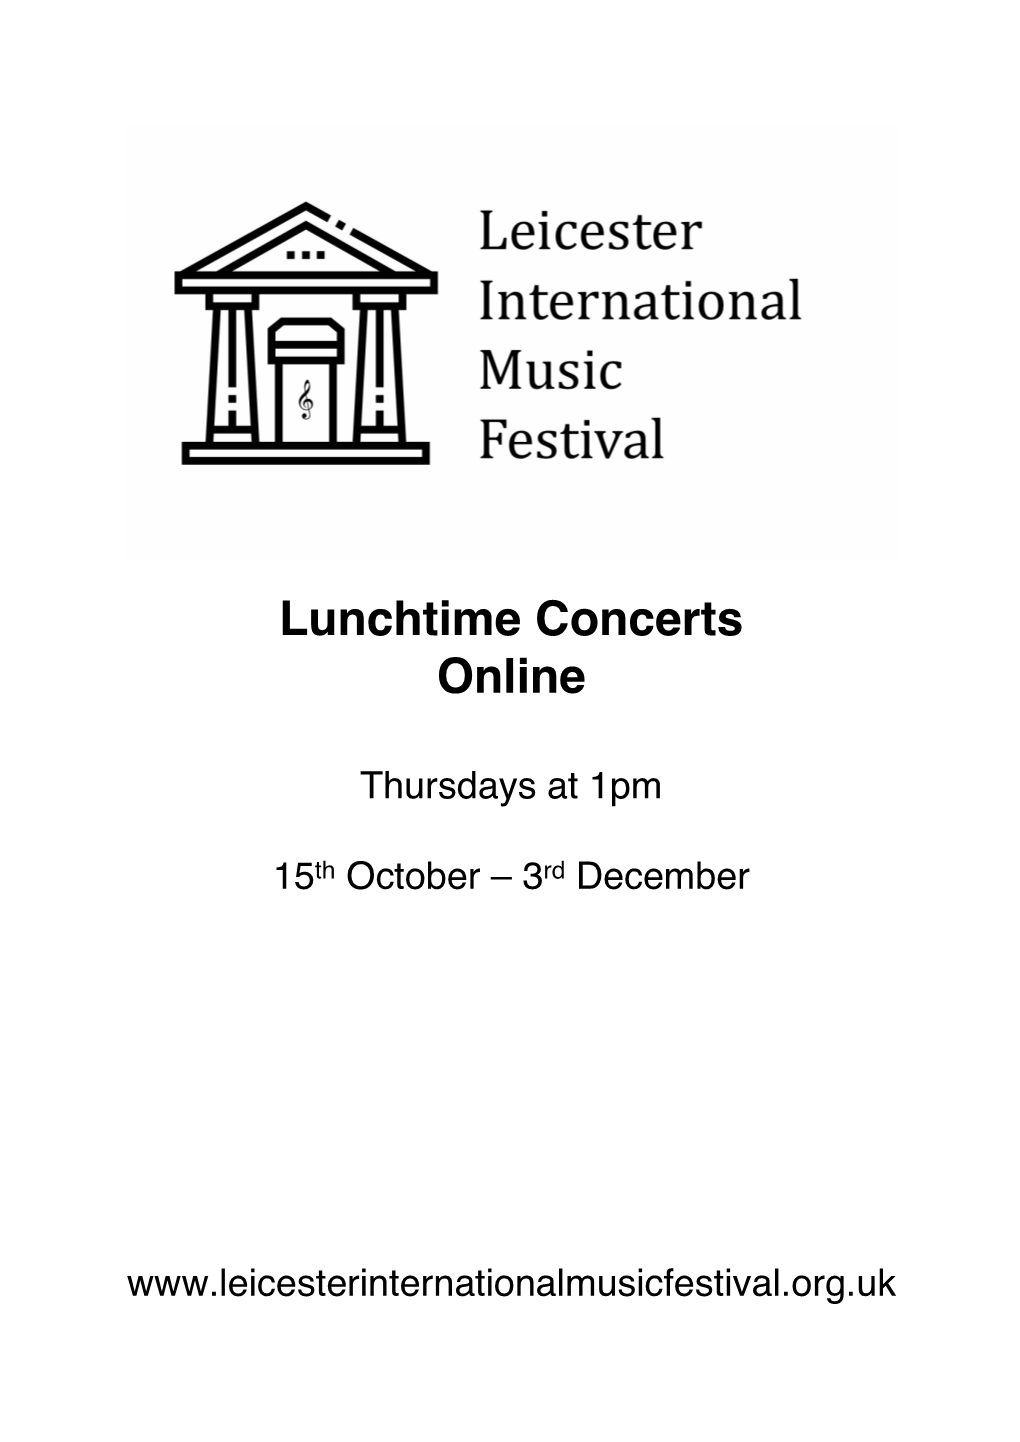 Lunchtime Concerts Online